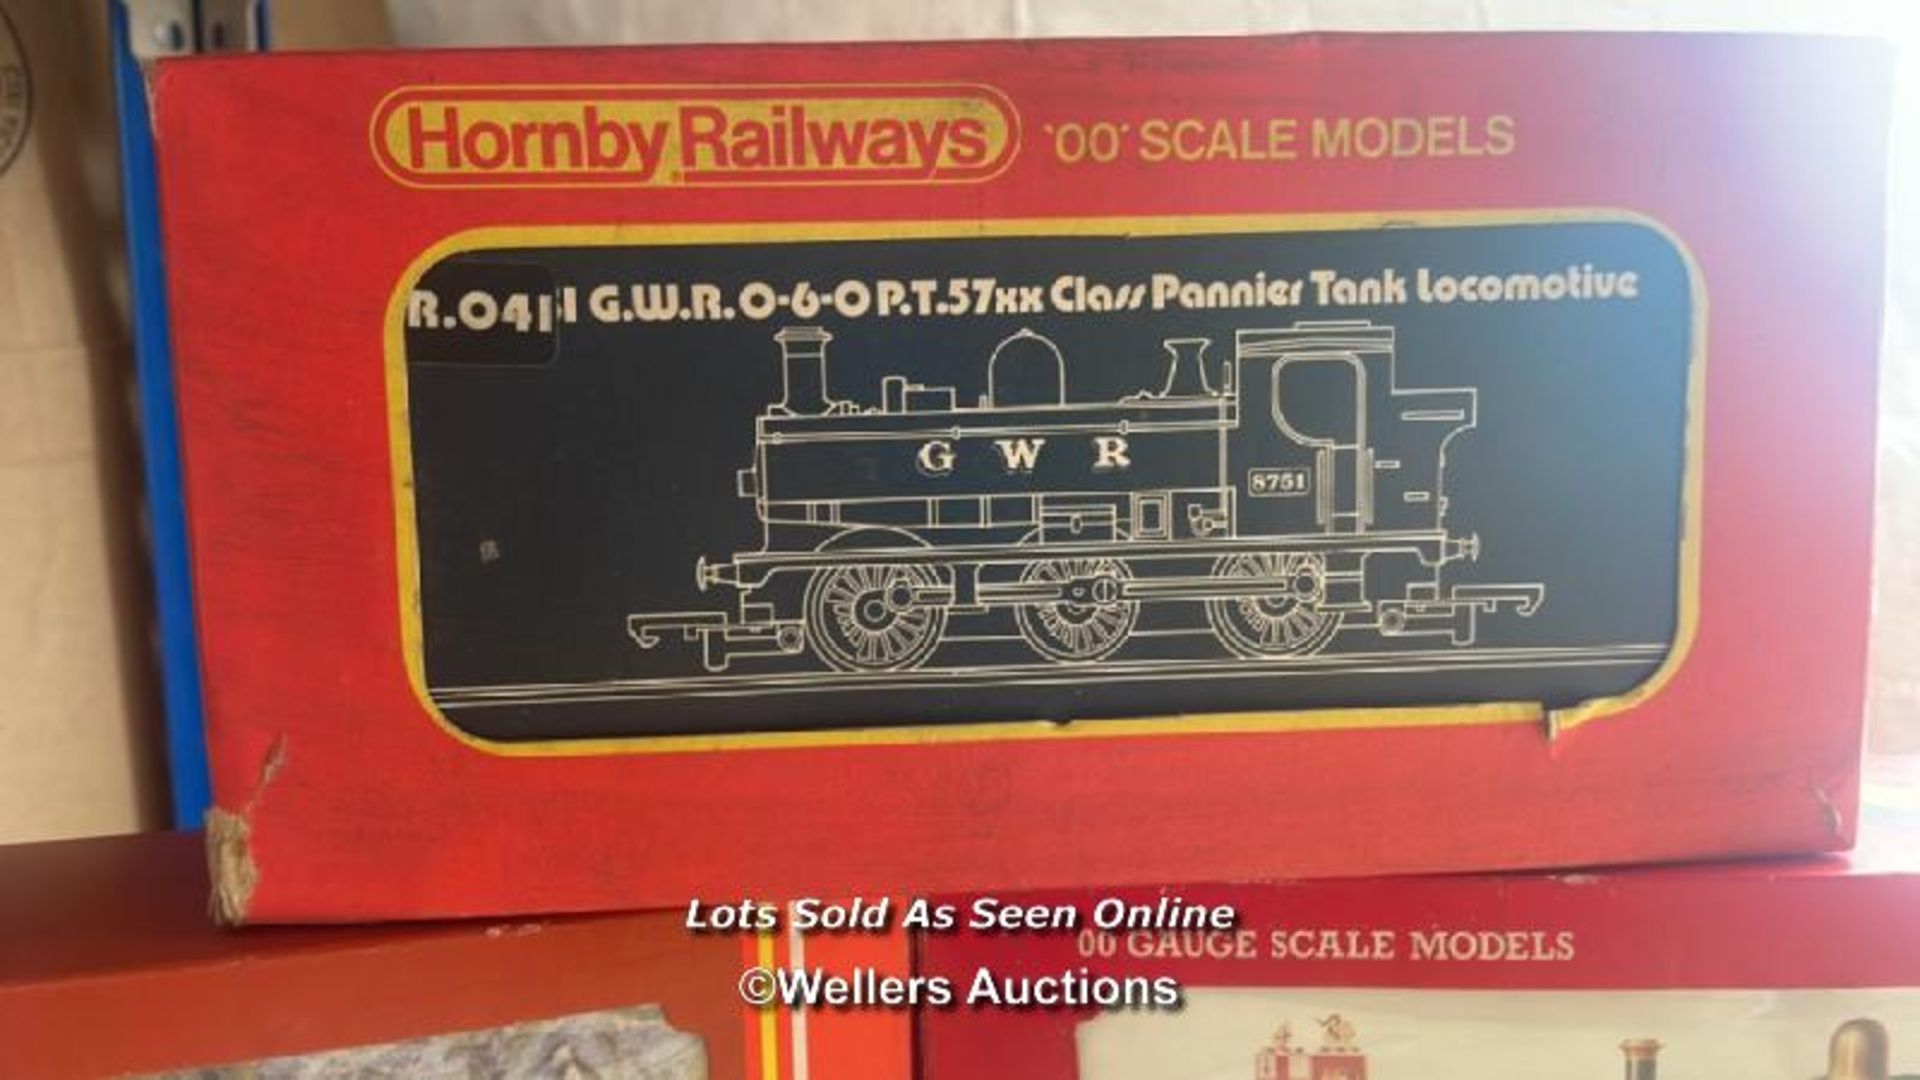 FIVE BOXED HORNBY MODEL TRAINS INCLUDING R.761 G.W.R. HALL LOCOMOTIVE - Image 3 of 6